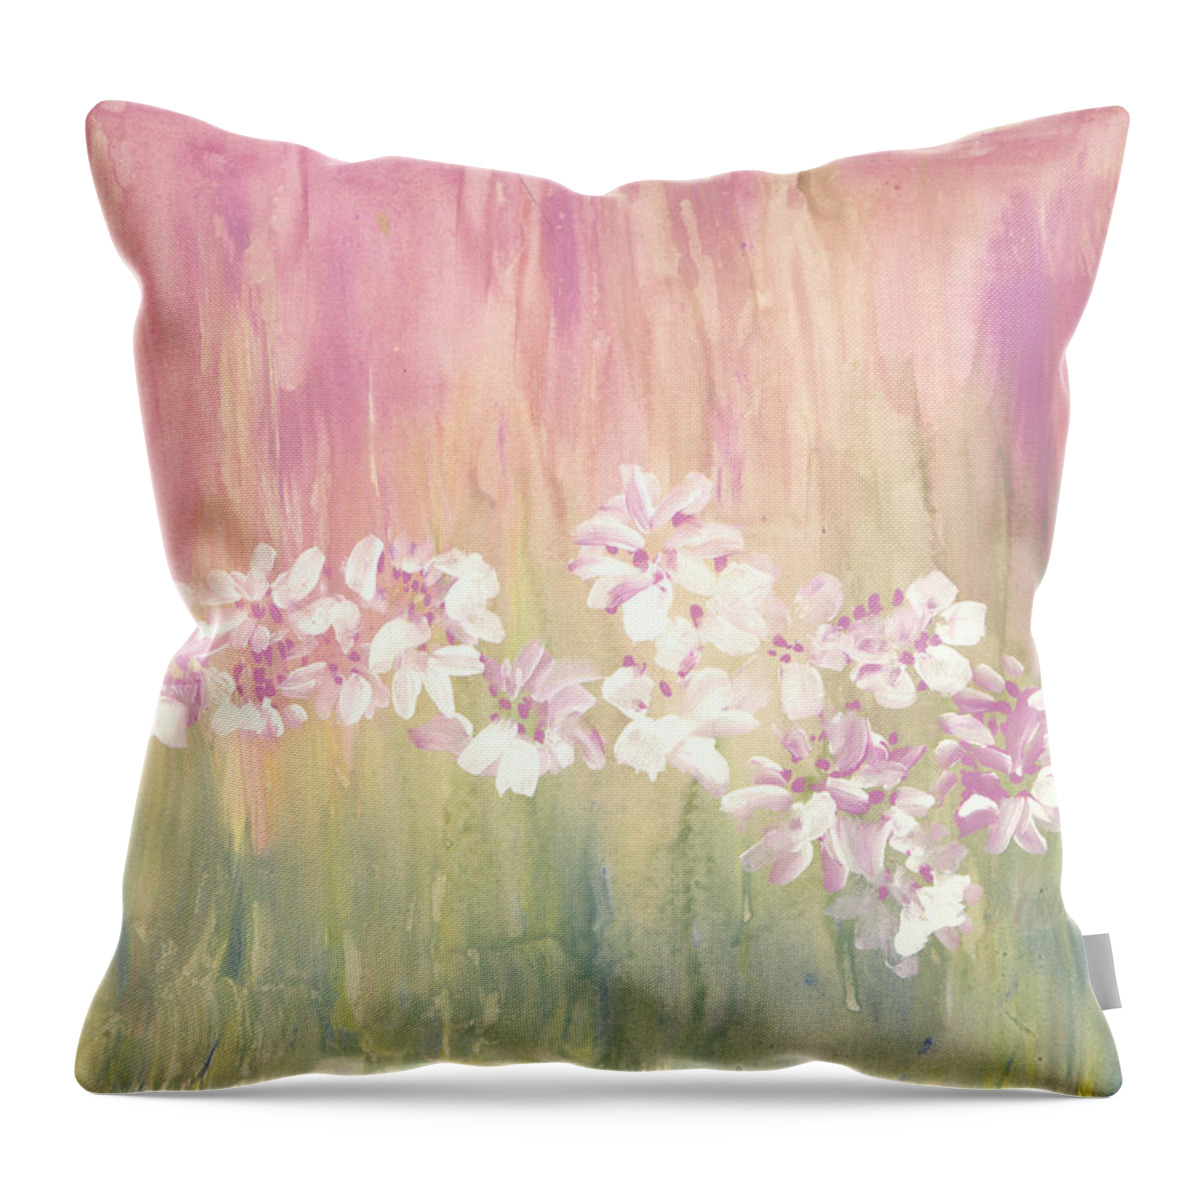 Mirage Throw Pillow featuring the painting Mirage by Don Wright